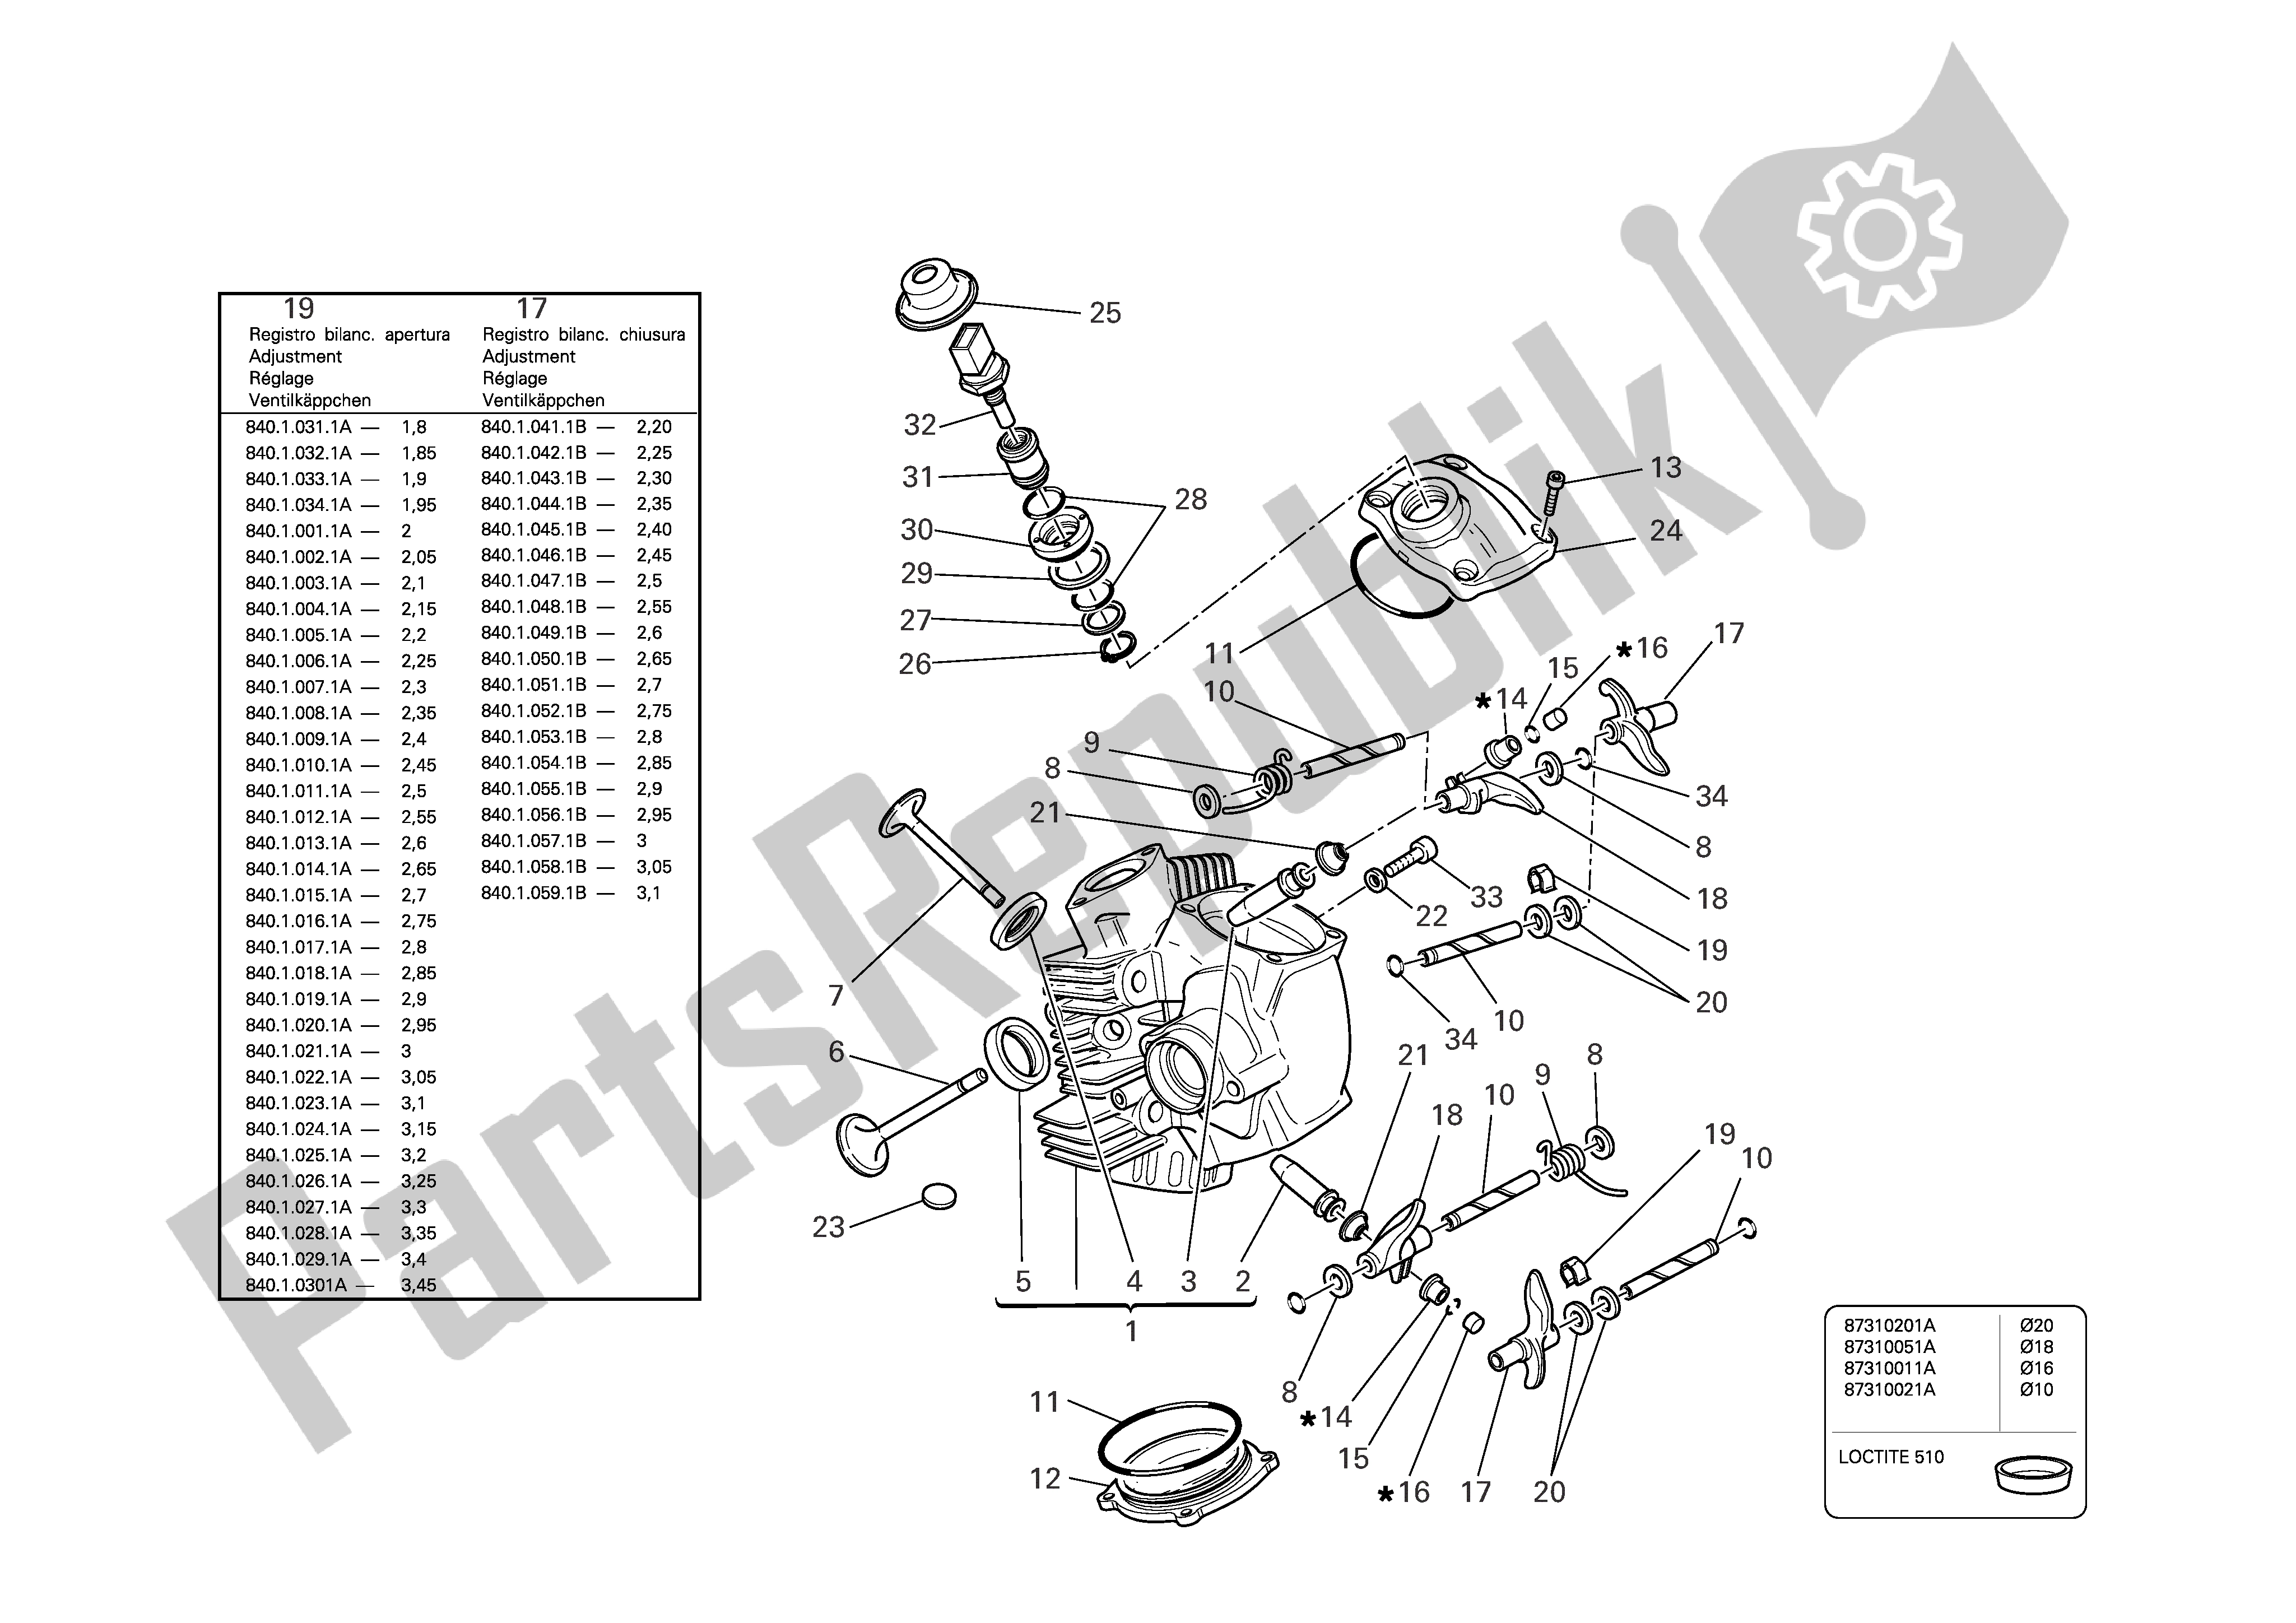 All parts for the Horizontal Cylinder Head of the Ducati Multistrada S 1000 2006